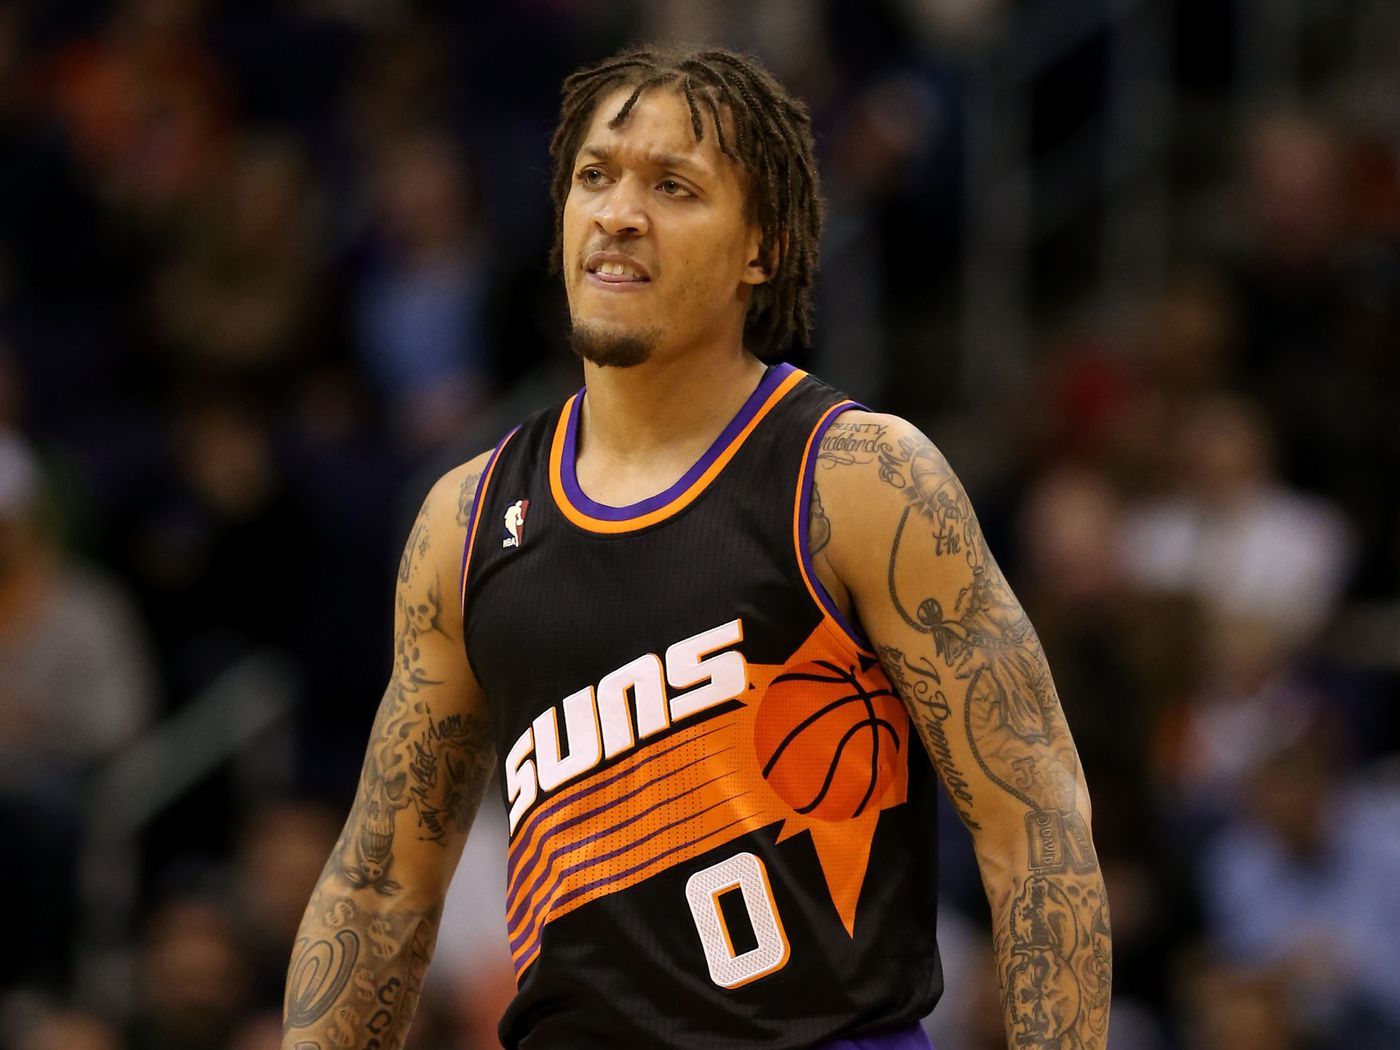 The rise and fall of Michael Beasley